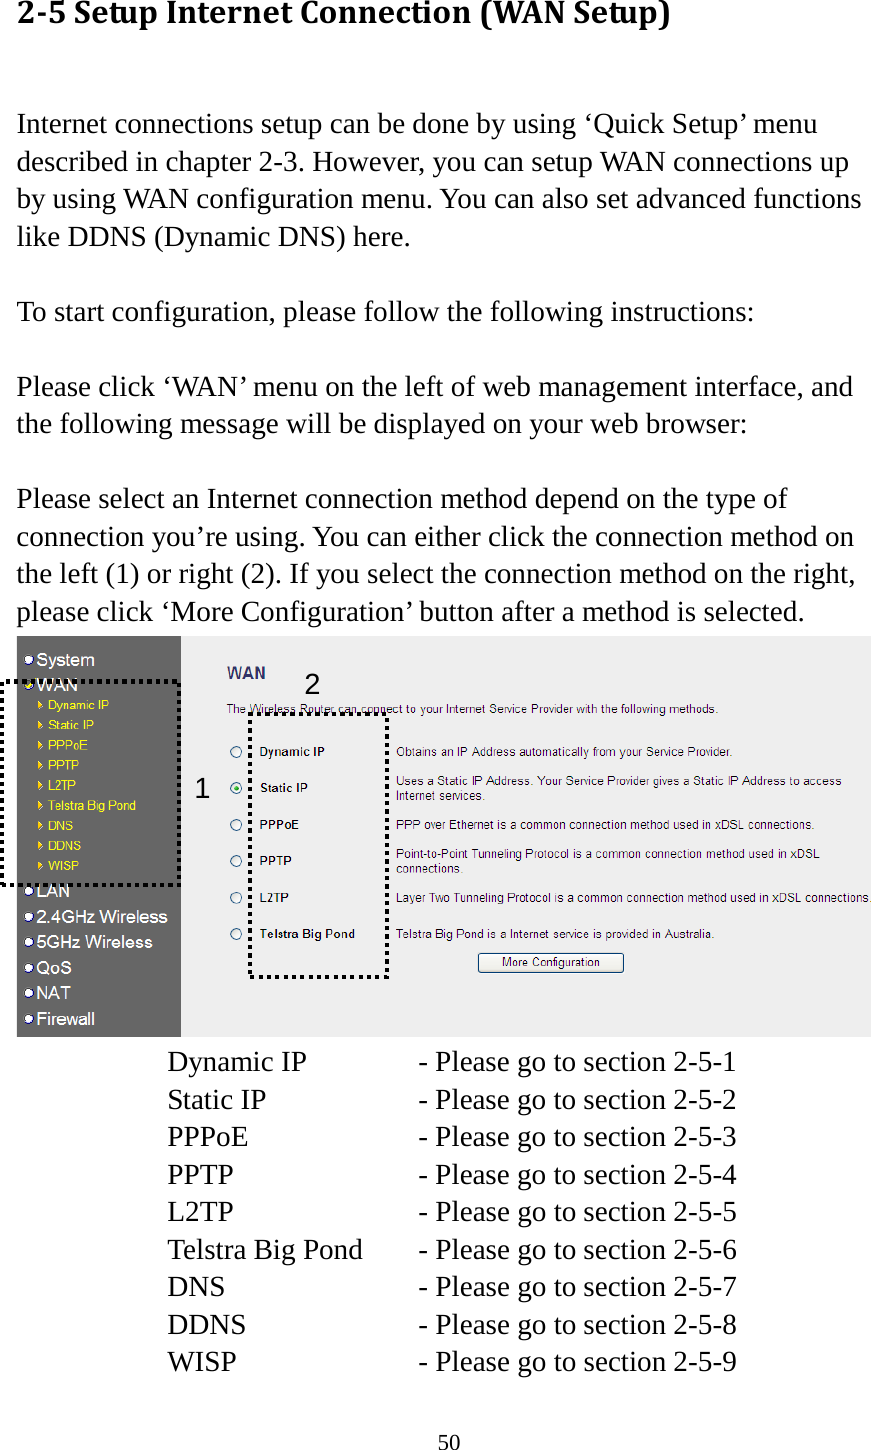 50 2-5 Setup Internet Connection (WAN Setup)  Internet connections setup can be done by using ‘Quick Setup’ menu described in chapter 2-3. However, you can setup WAN connections up by using WAN configuration menu. You can also set advanced functions like DDNS (Dynamic DNS) here.  To start configuration, please follow the following instructions:  Please click ‘WAN’ menu on the left of web management interface, and the following message will be displayed on your web browser:  Please select an Internet connection method depend on the type of connection you’re using. You can either click the connection method on the left (1) or right (2). If you select the connection method on the right, please click ‘More Configuration’ button after a method is selected.  Dynamic IP     - Please go to section 2-5-1 Static IP       - Please go to section 2-5-2 PPPoE        - Please go to section 2-5-3 PPTP        - Please go to section 2-5-4 L2TP        - Please go to section 2-5-5 Telstra Big Pond   - Please go to section 2-5-6 DNS        - Please go to section 2-5-7 DDNS        - Please go to section 2-5-8 WISP        - Please go to section 2-5-9 1 2 